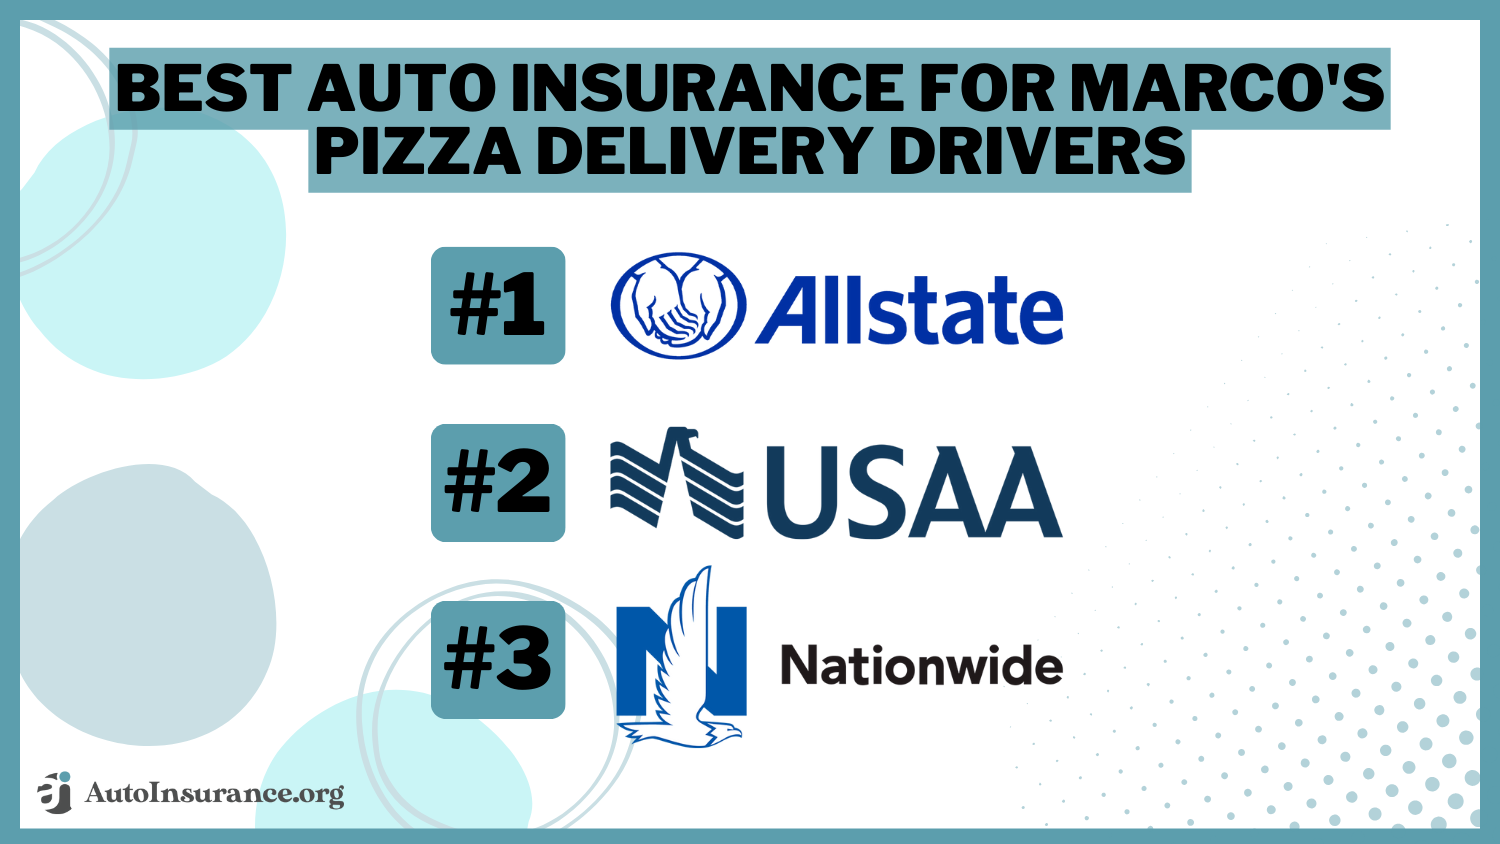 Allstate, USAA and Nationwide: Best Auto Insurance for Marco’s Pizza Delivery Drivers